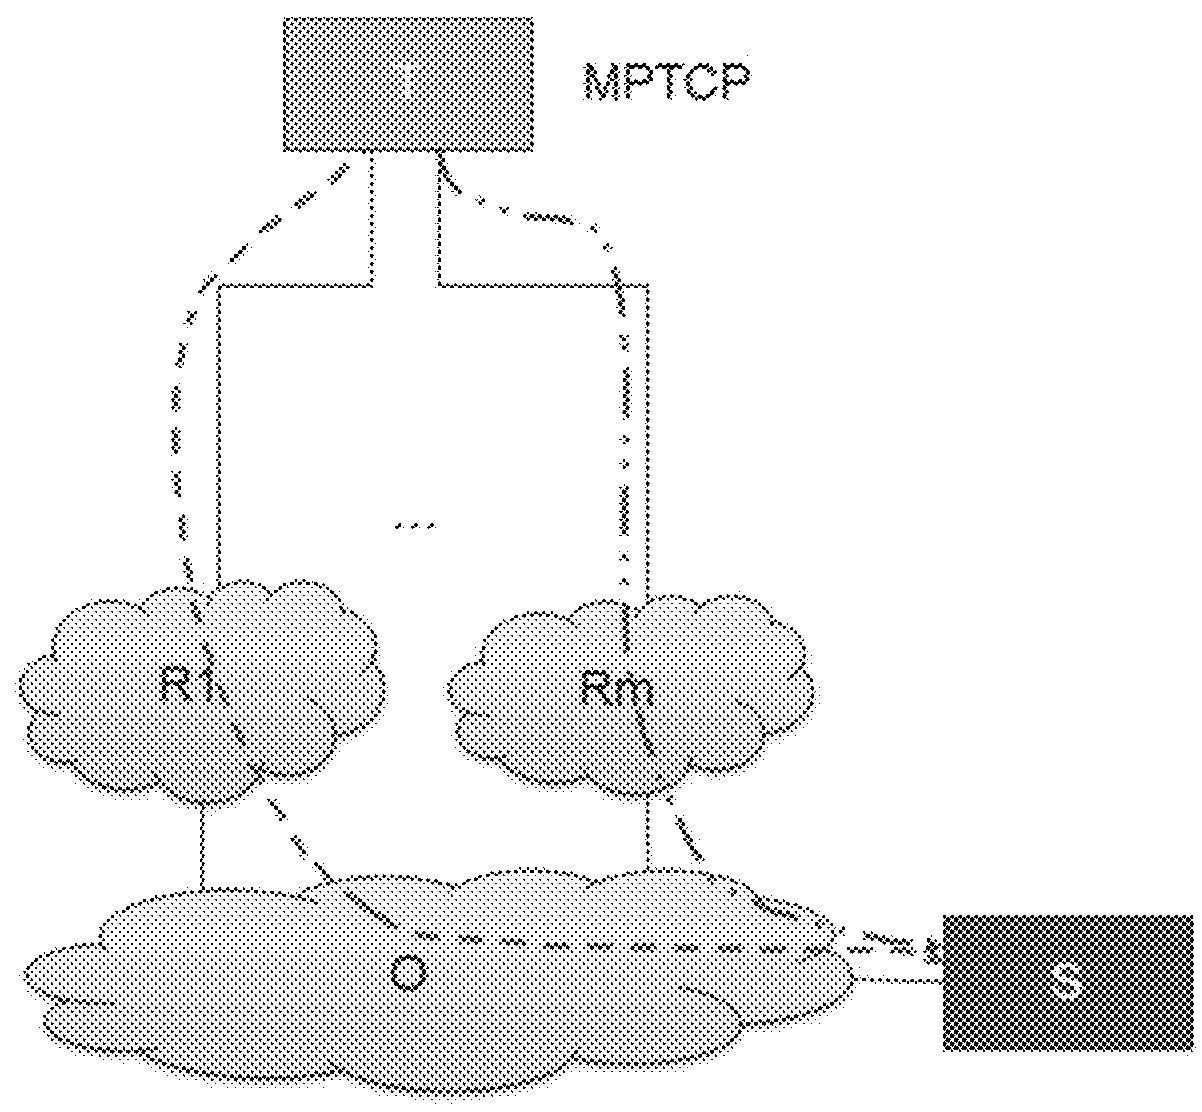 A method of emulating a multipath connection